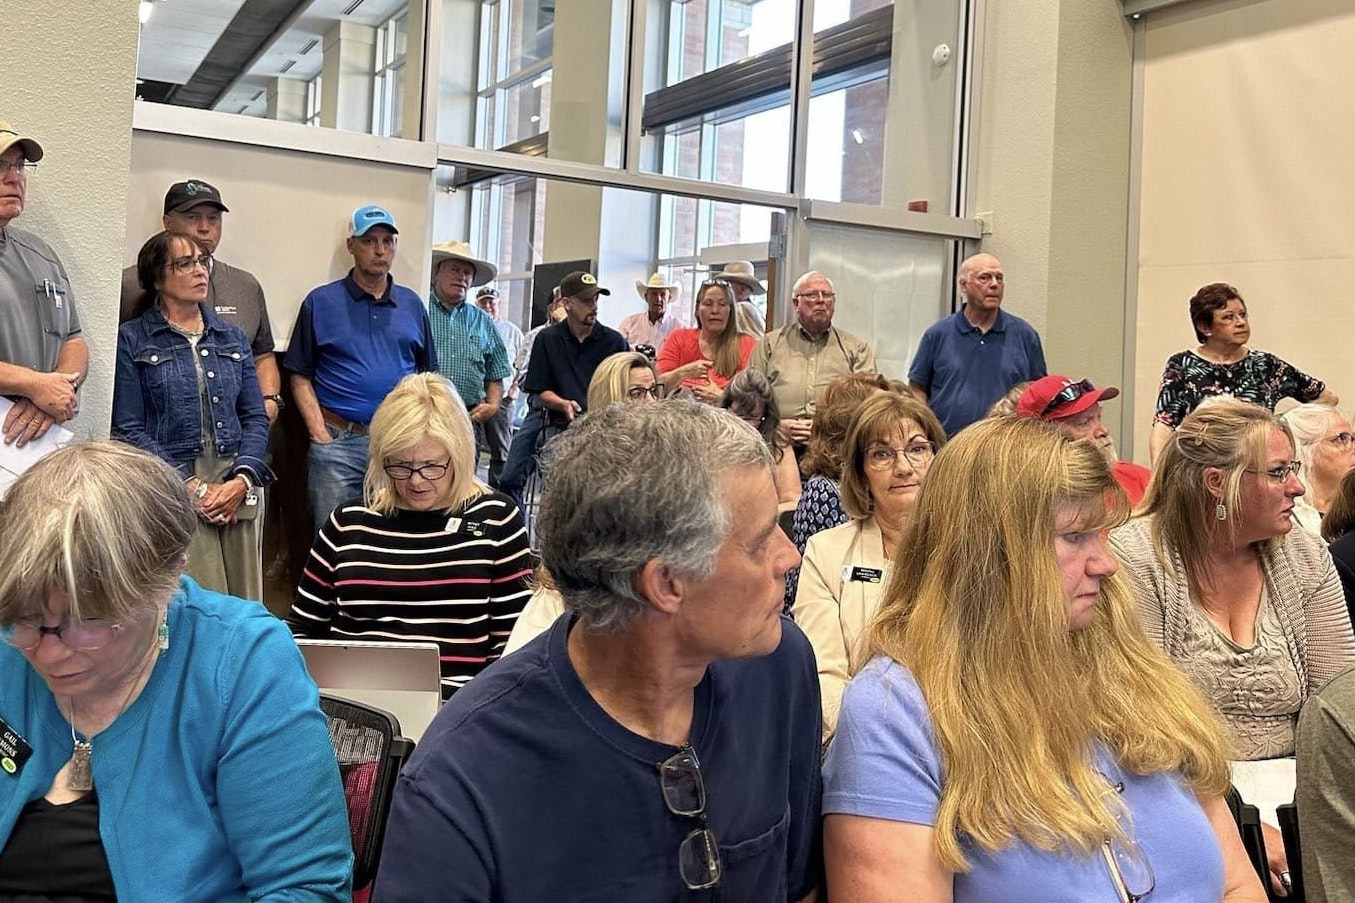 Wyoming residents pack a meeting room at Sheridan College on June 26 to tell lawmakers what they think about soaring property tax rates.